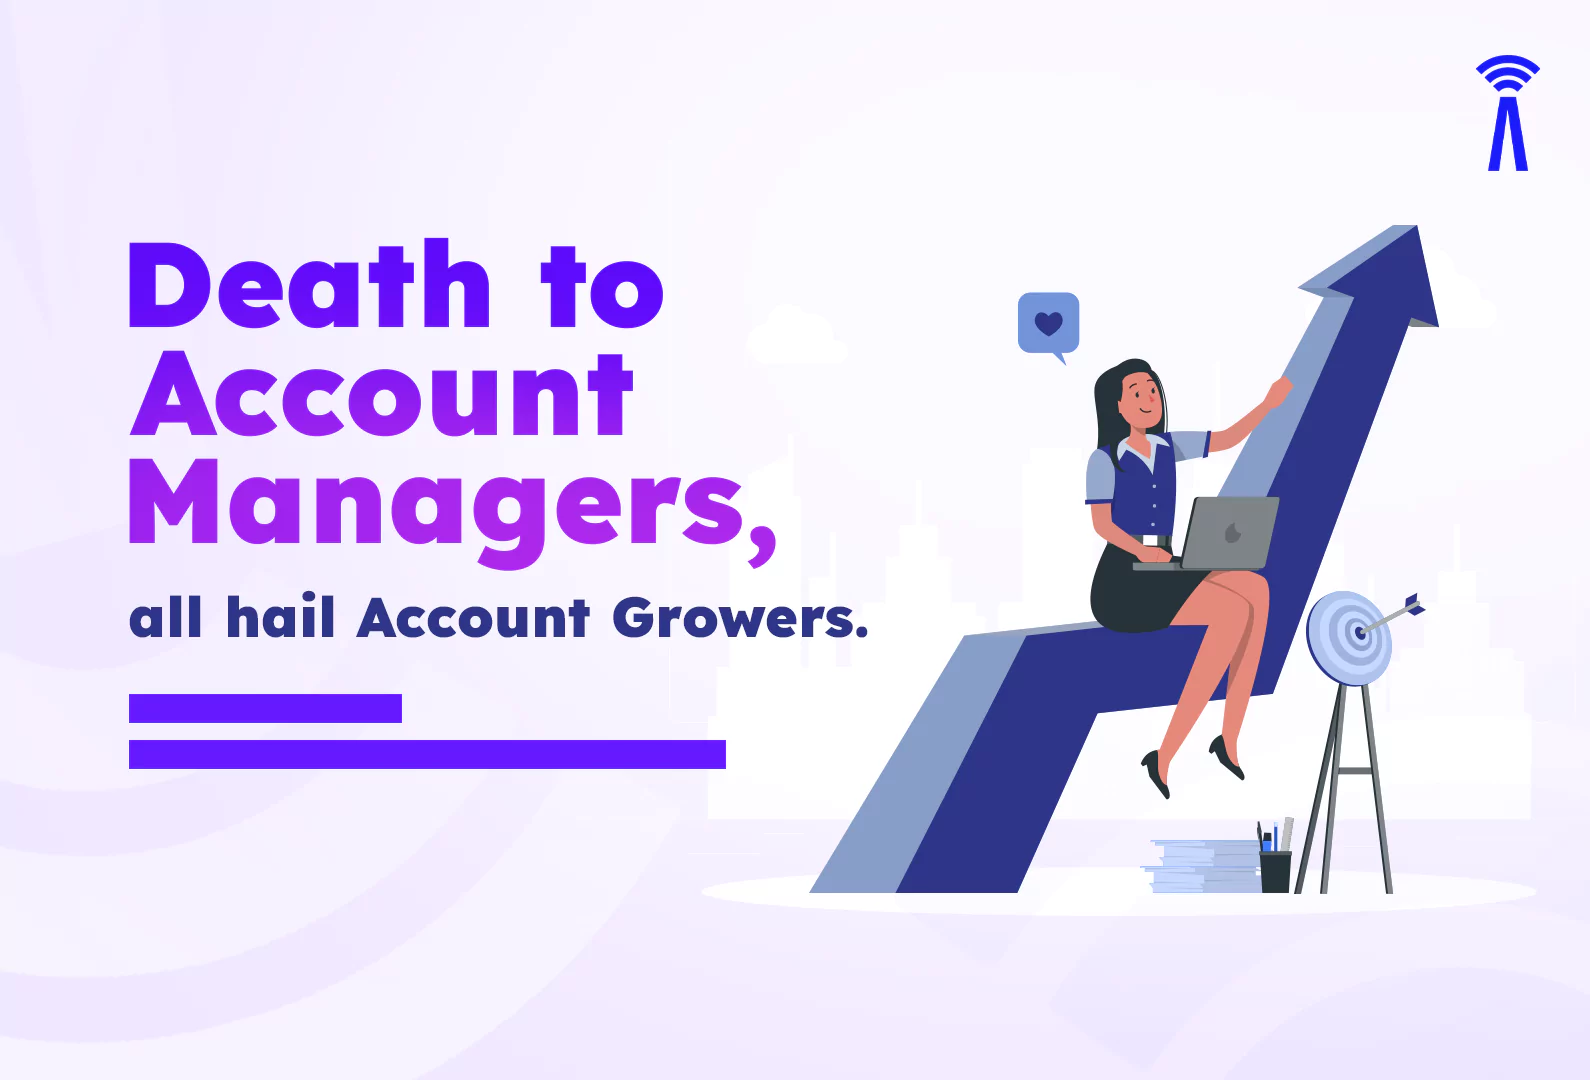 Death to Account Managers, all hail Account Growers.